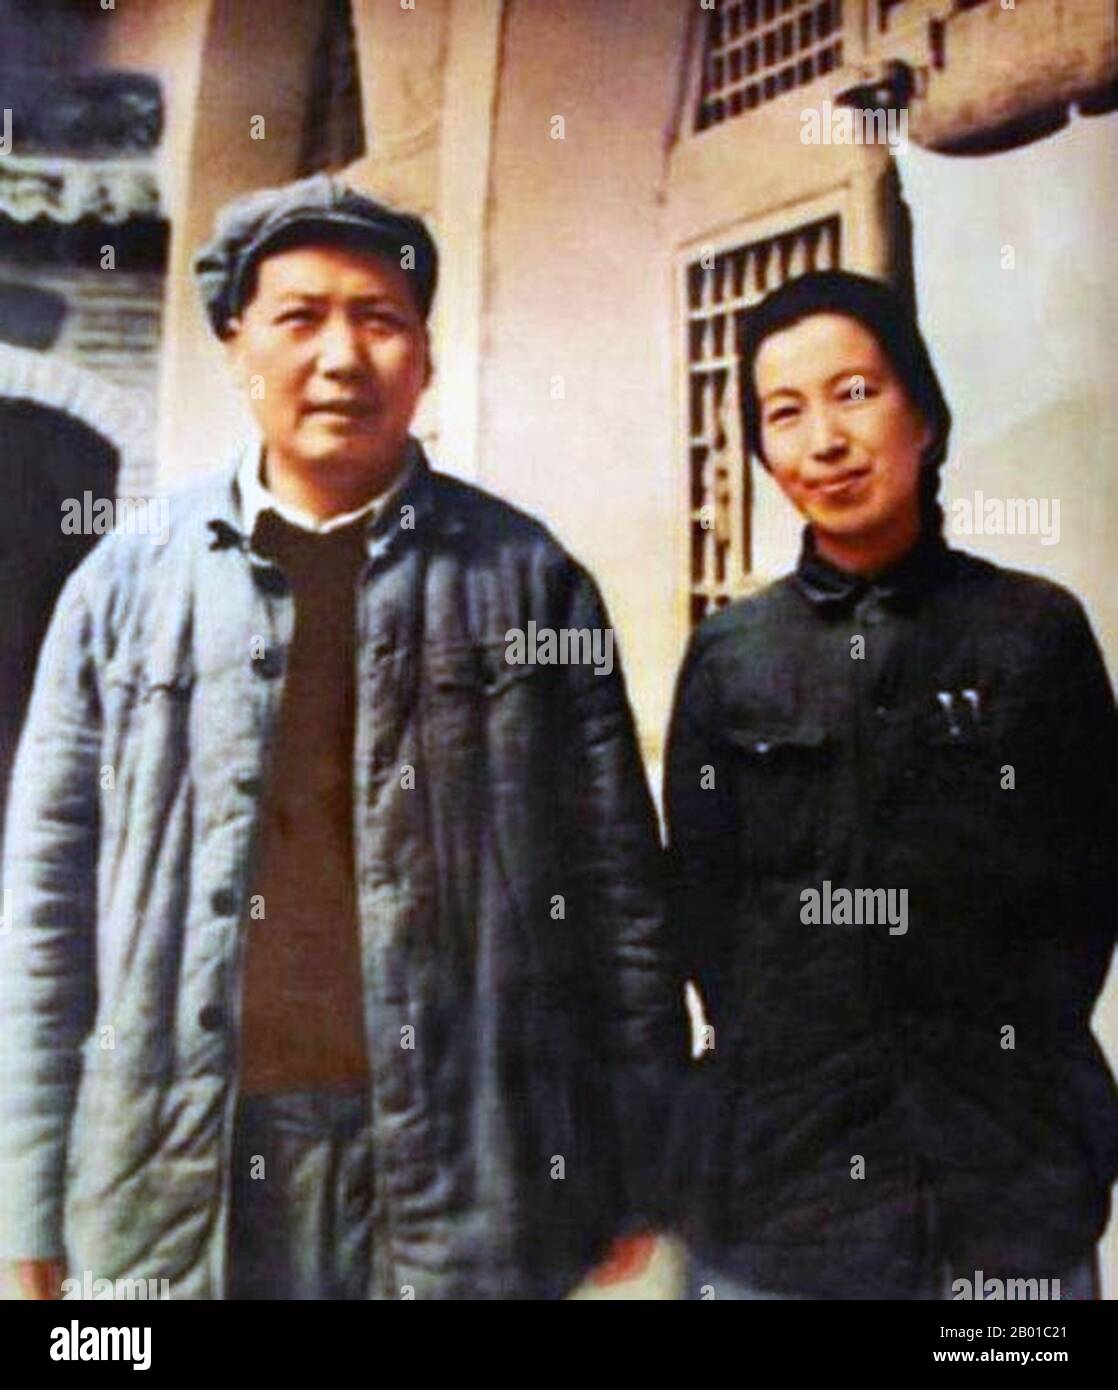 China: Mao Zedong (26 December 1893 - 9 September 1976) with his fourth wife, Jiang Qing (19 March 1914 - 14 May 1991), often called 'Madame Mao', in 1946.  Jiang Qing (Chiang Ch'ing) was the pseudonym that was used by Chinese leader Mao Zedong's last wife and major Communist Party of China power figure. She went by the stage name Lan Ping during her acting career, and was known by various other names during her life. She married Mao in Yan'an in November 1938, and is sometimes referred to as Madame Mao in Western literature, serving as Communist China's first first lady. Stock Photo